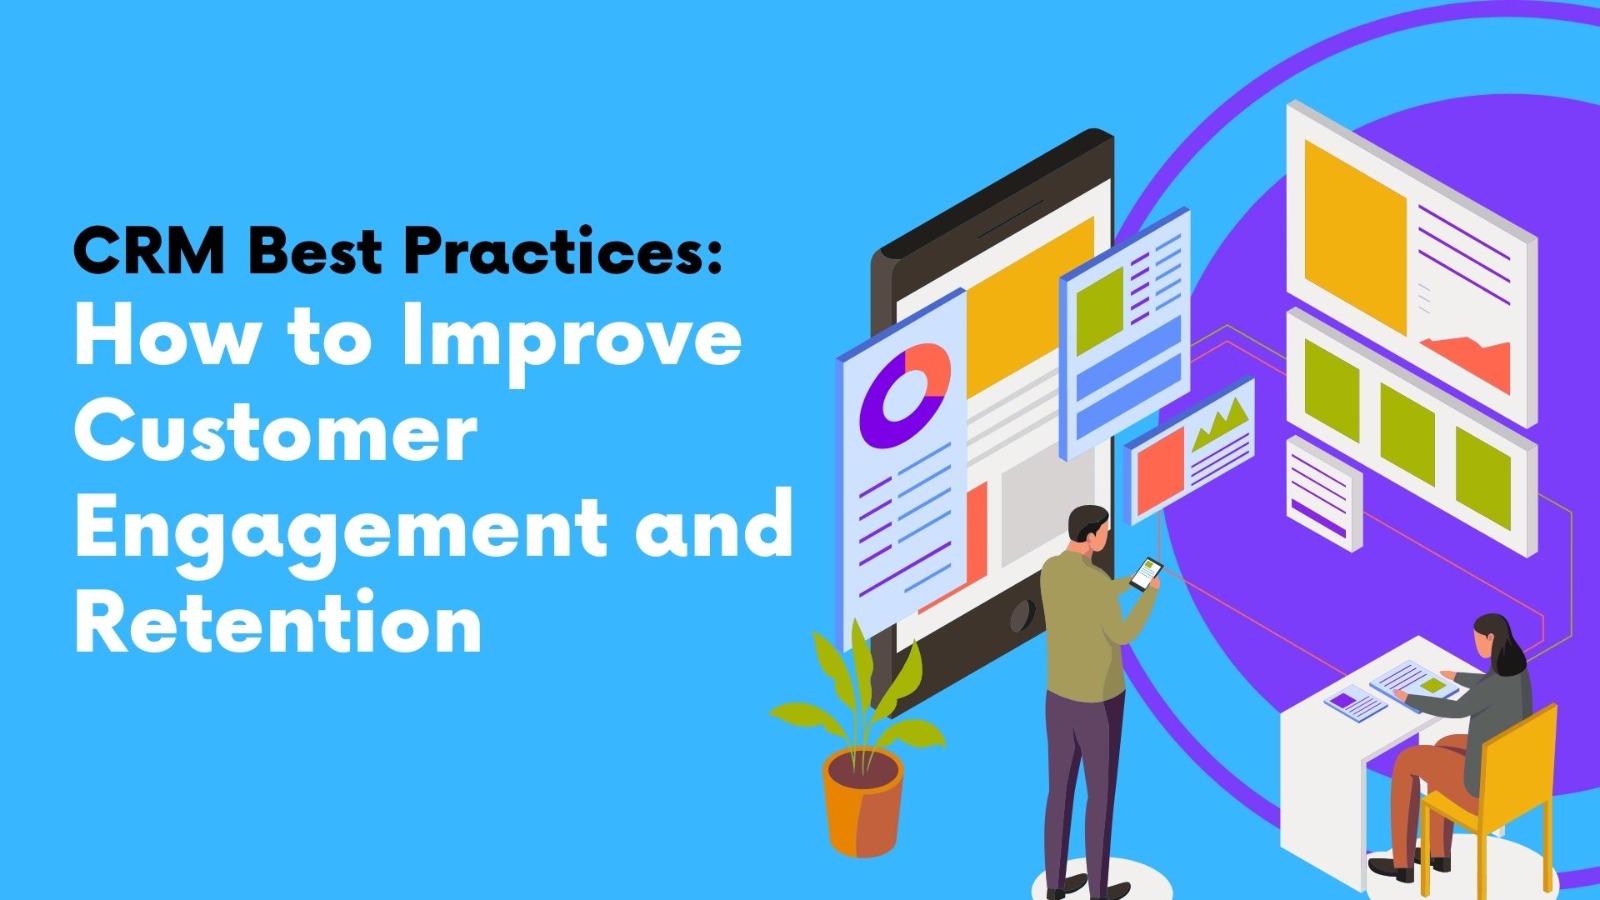 CRM Best Practices: How to Improve Customer Engagement and Retention